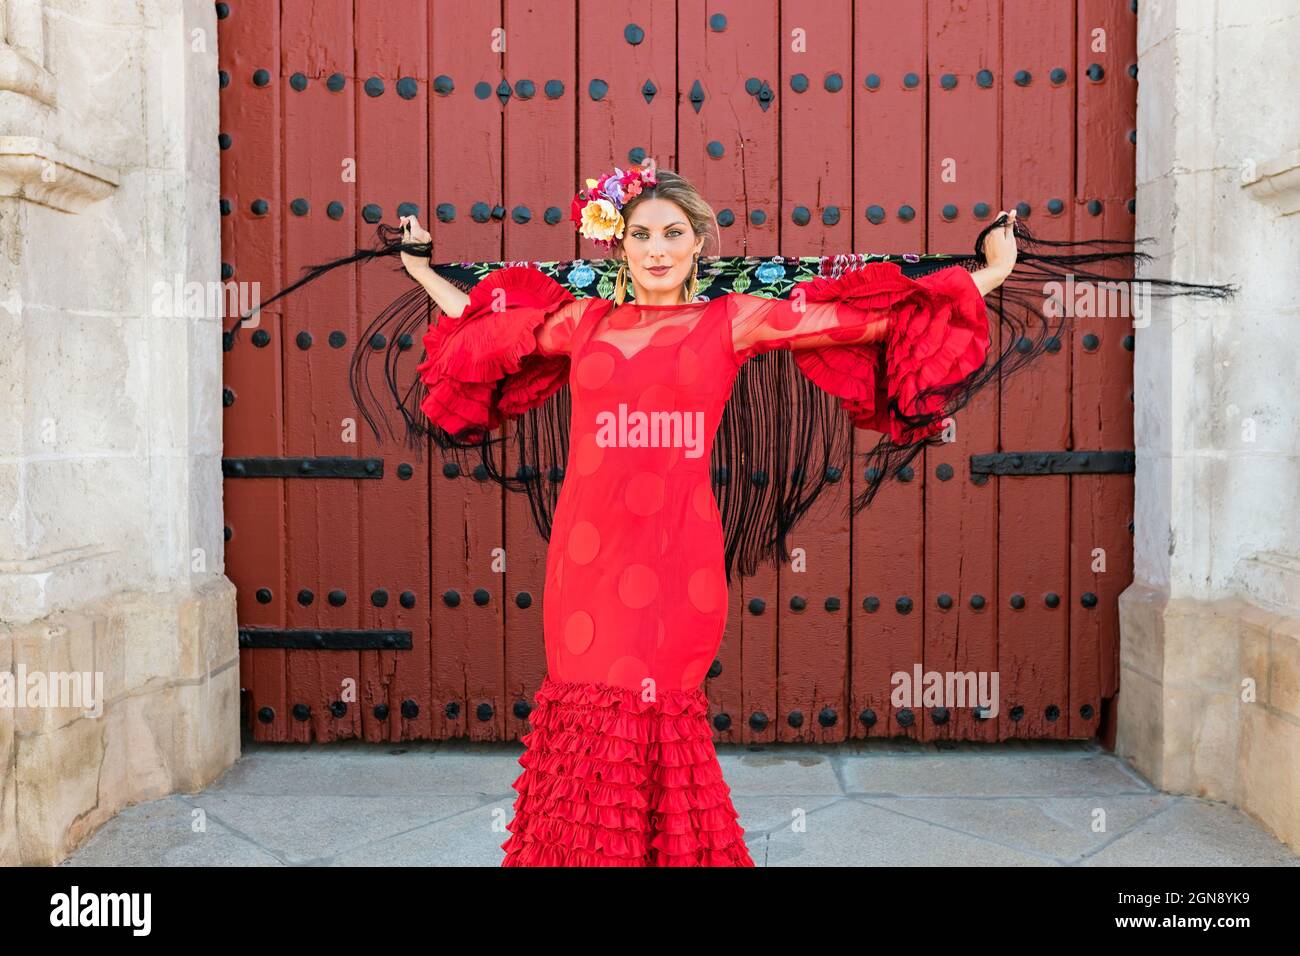 Female flamenco dancer holding shawl while spinning in front of door Stock Photo